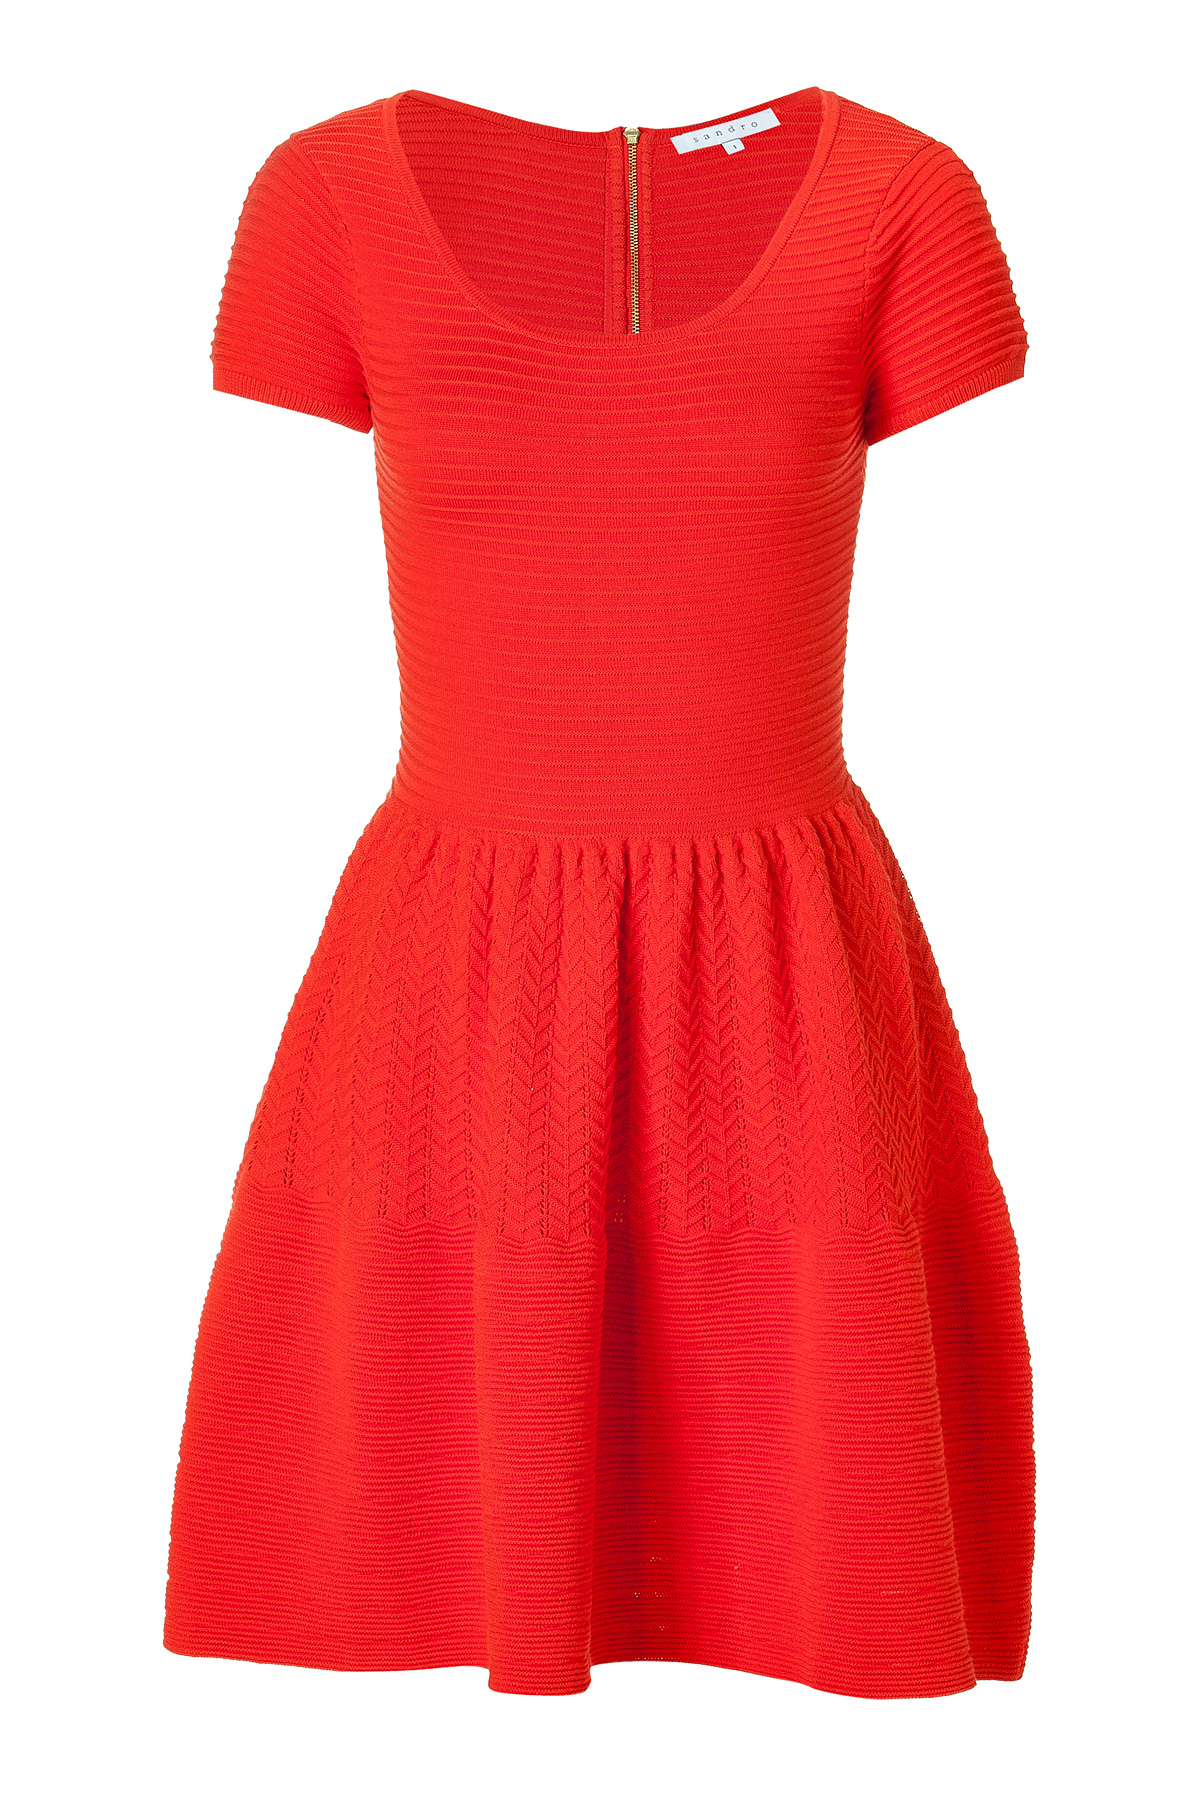 Lyst - Sandro Cherry Red Knit Ruffus Dress in Red